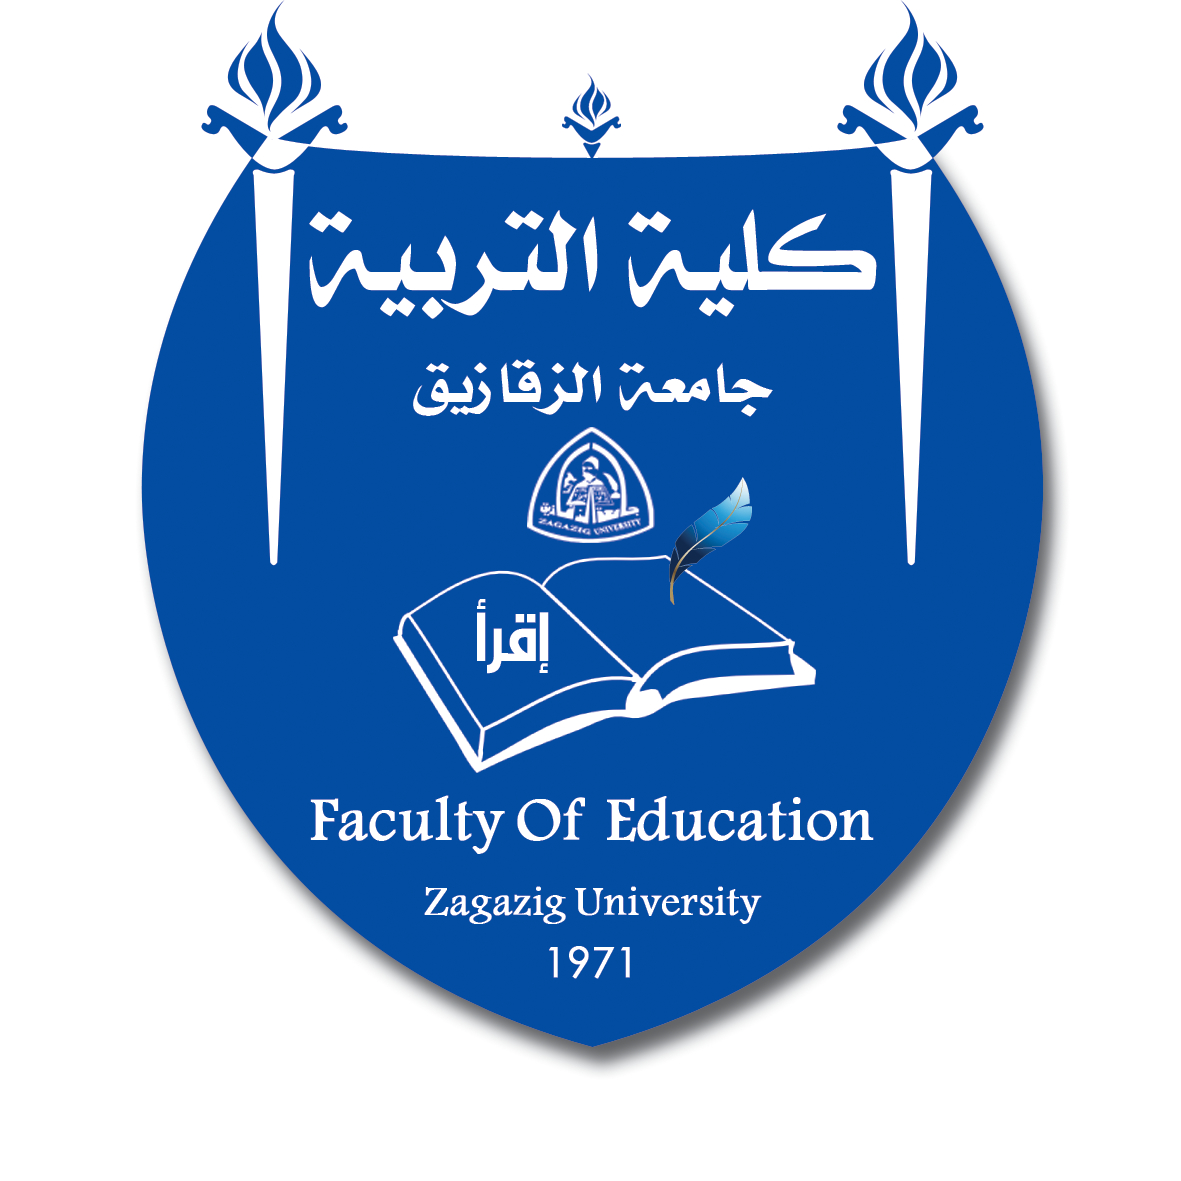 the organizational structure of the Projects Management Unit at the faculty of Eduaction